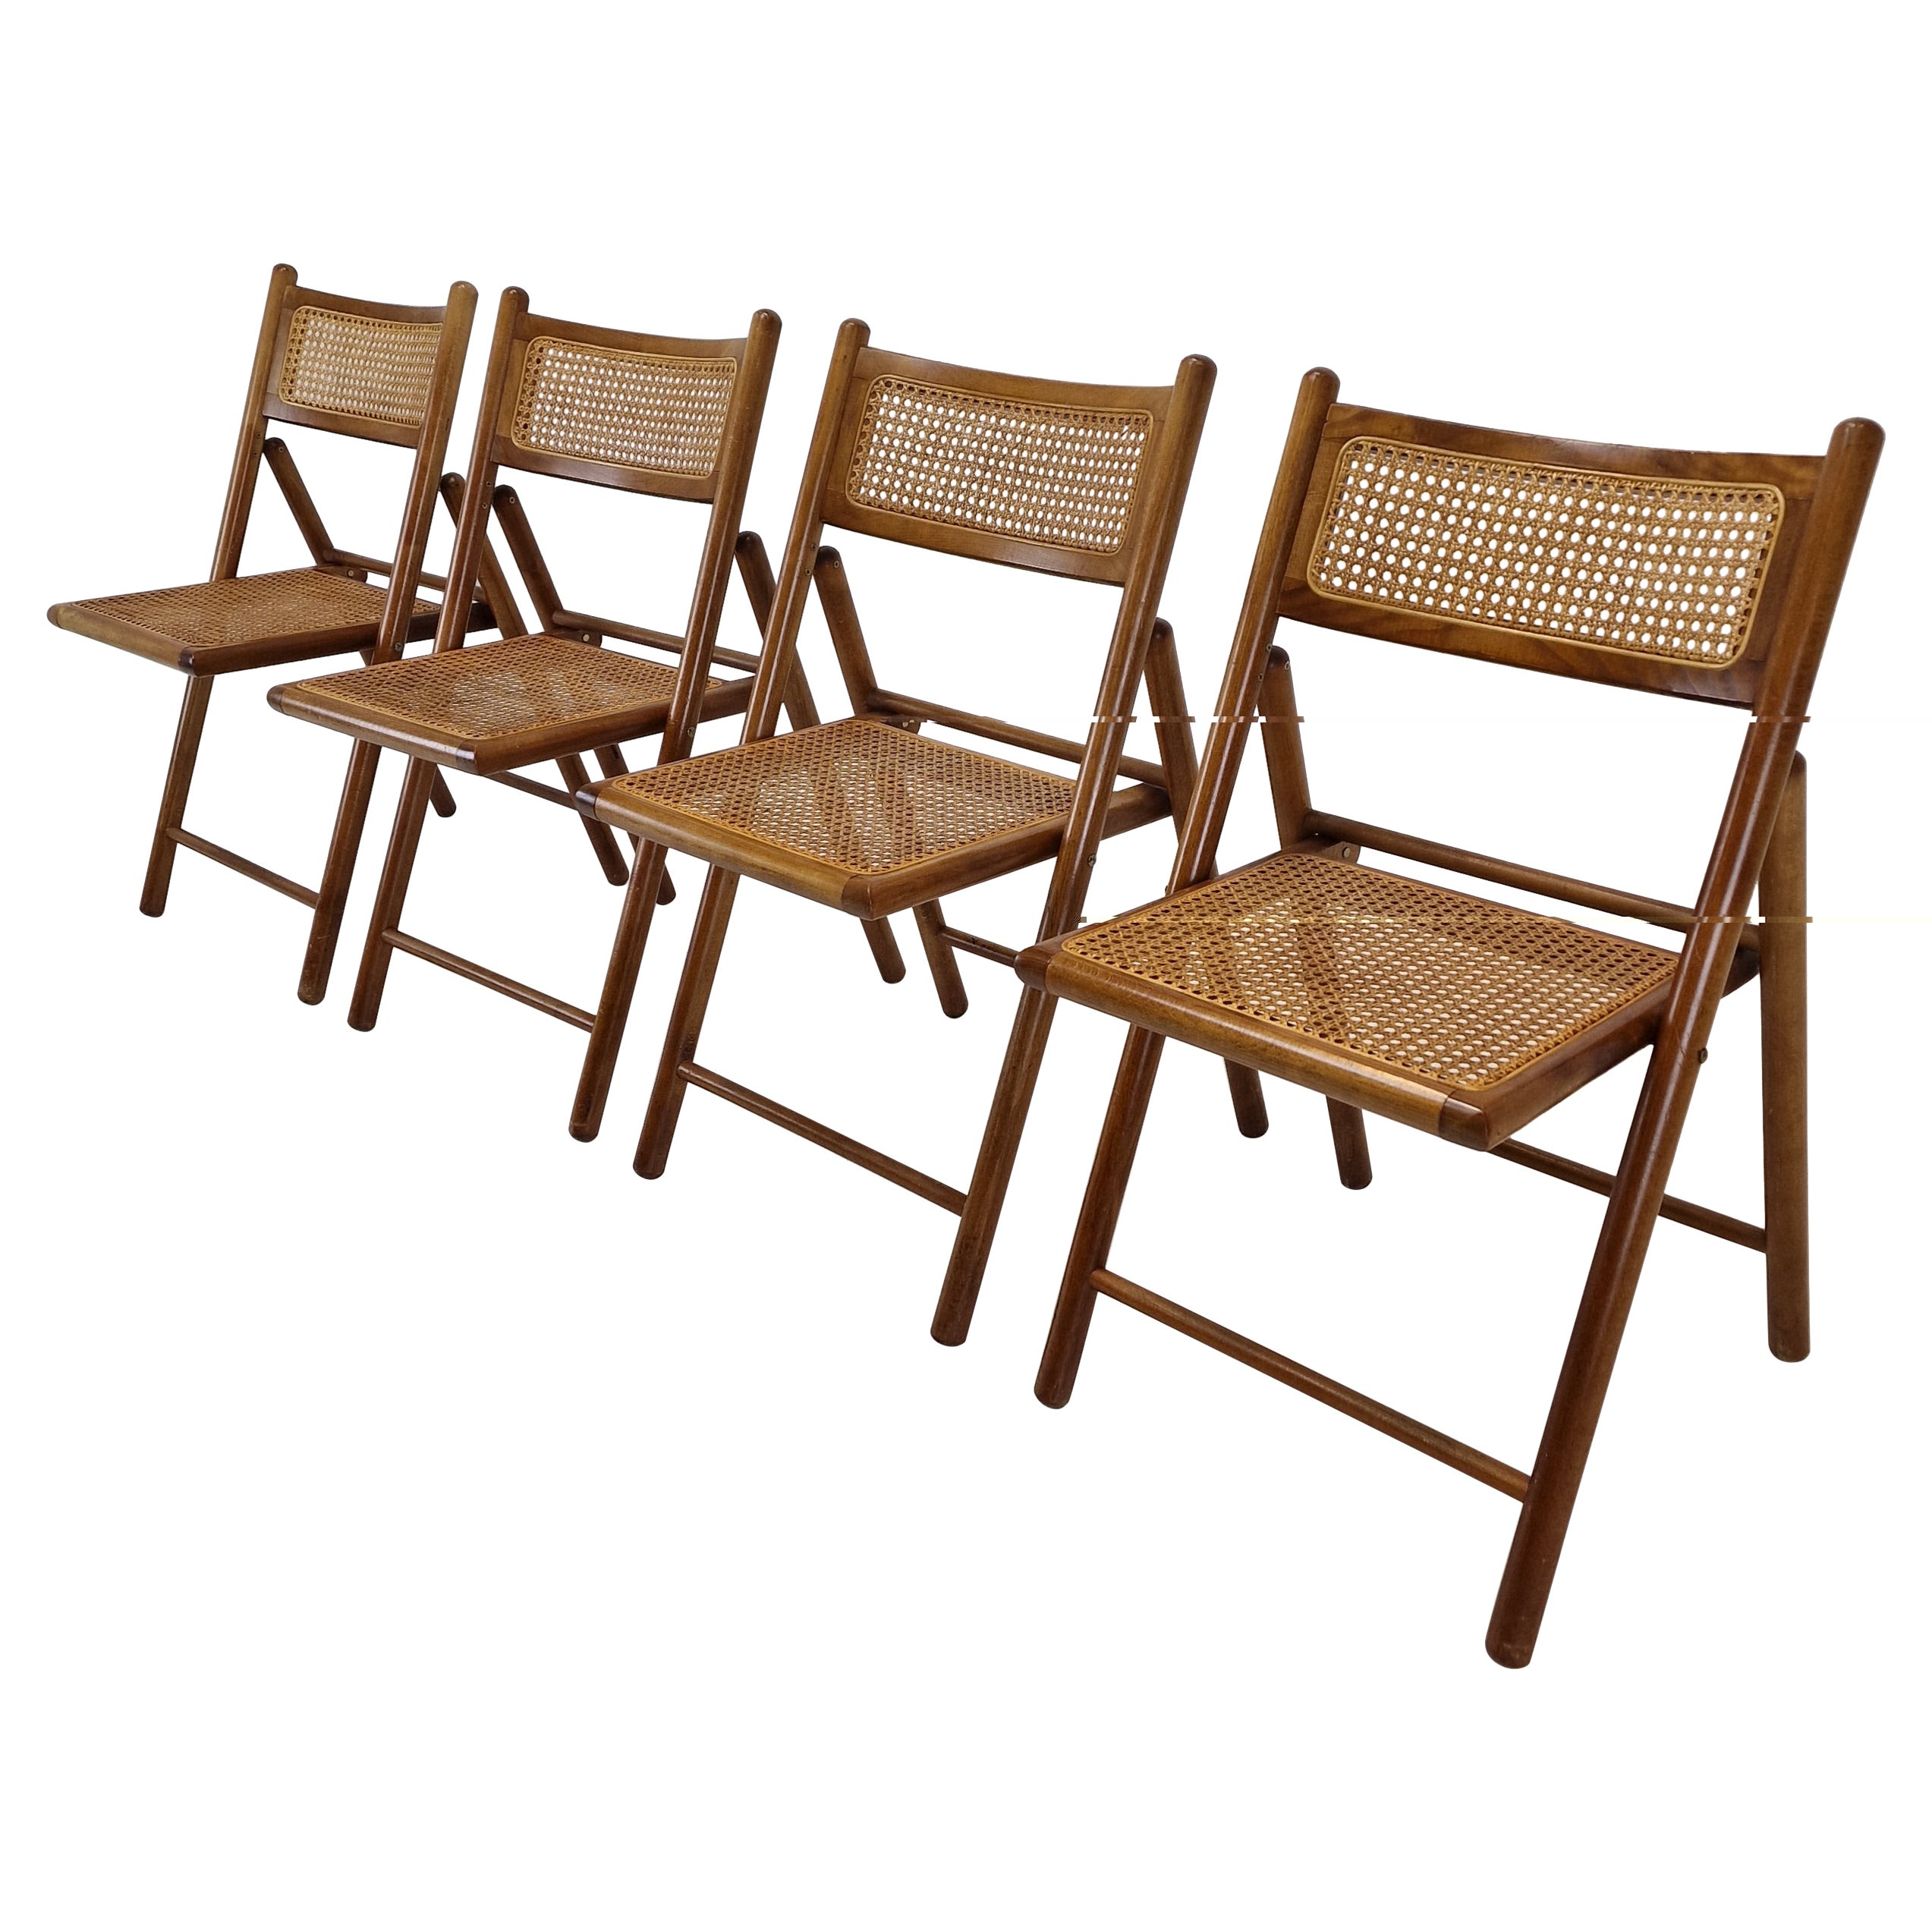 Set of 4 Italian Folding Chairs with Rattan, 1980s